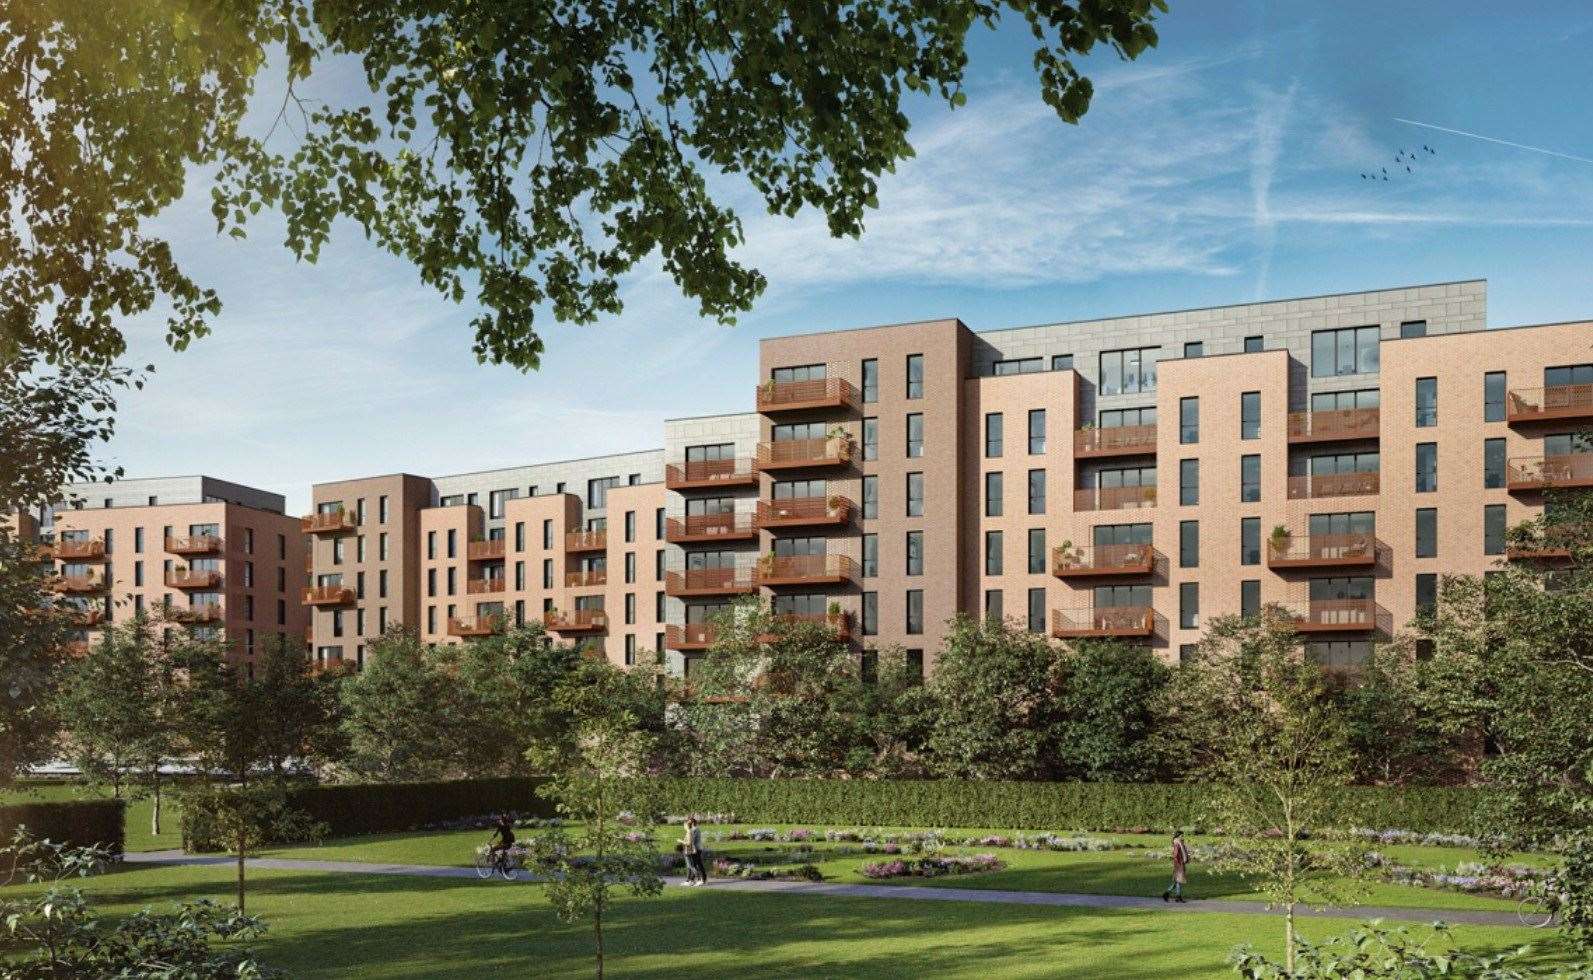 Starlight has acquired the buy-to-rent properties in Dartford - artists' impression of how it will look when complete. Picture: CNW Group/Starlight Investments